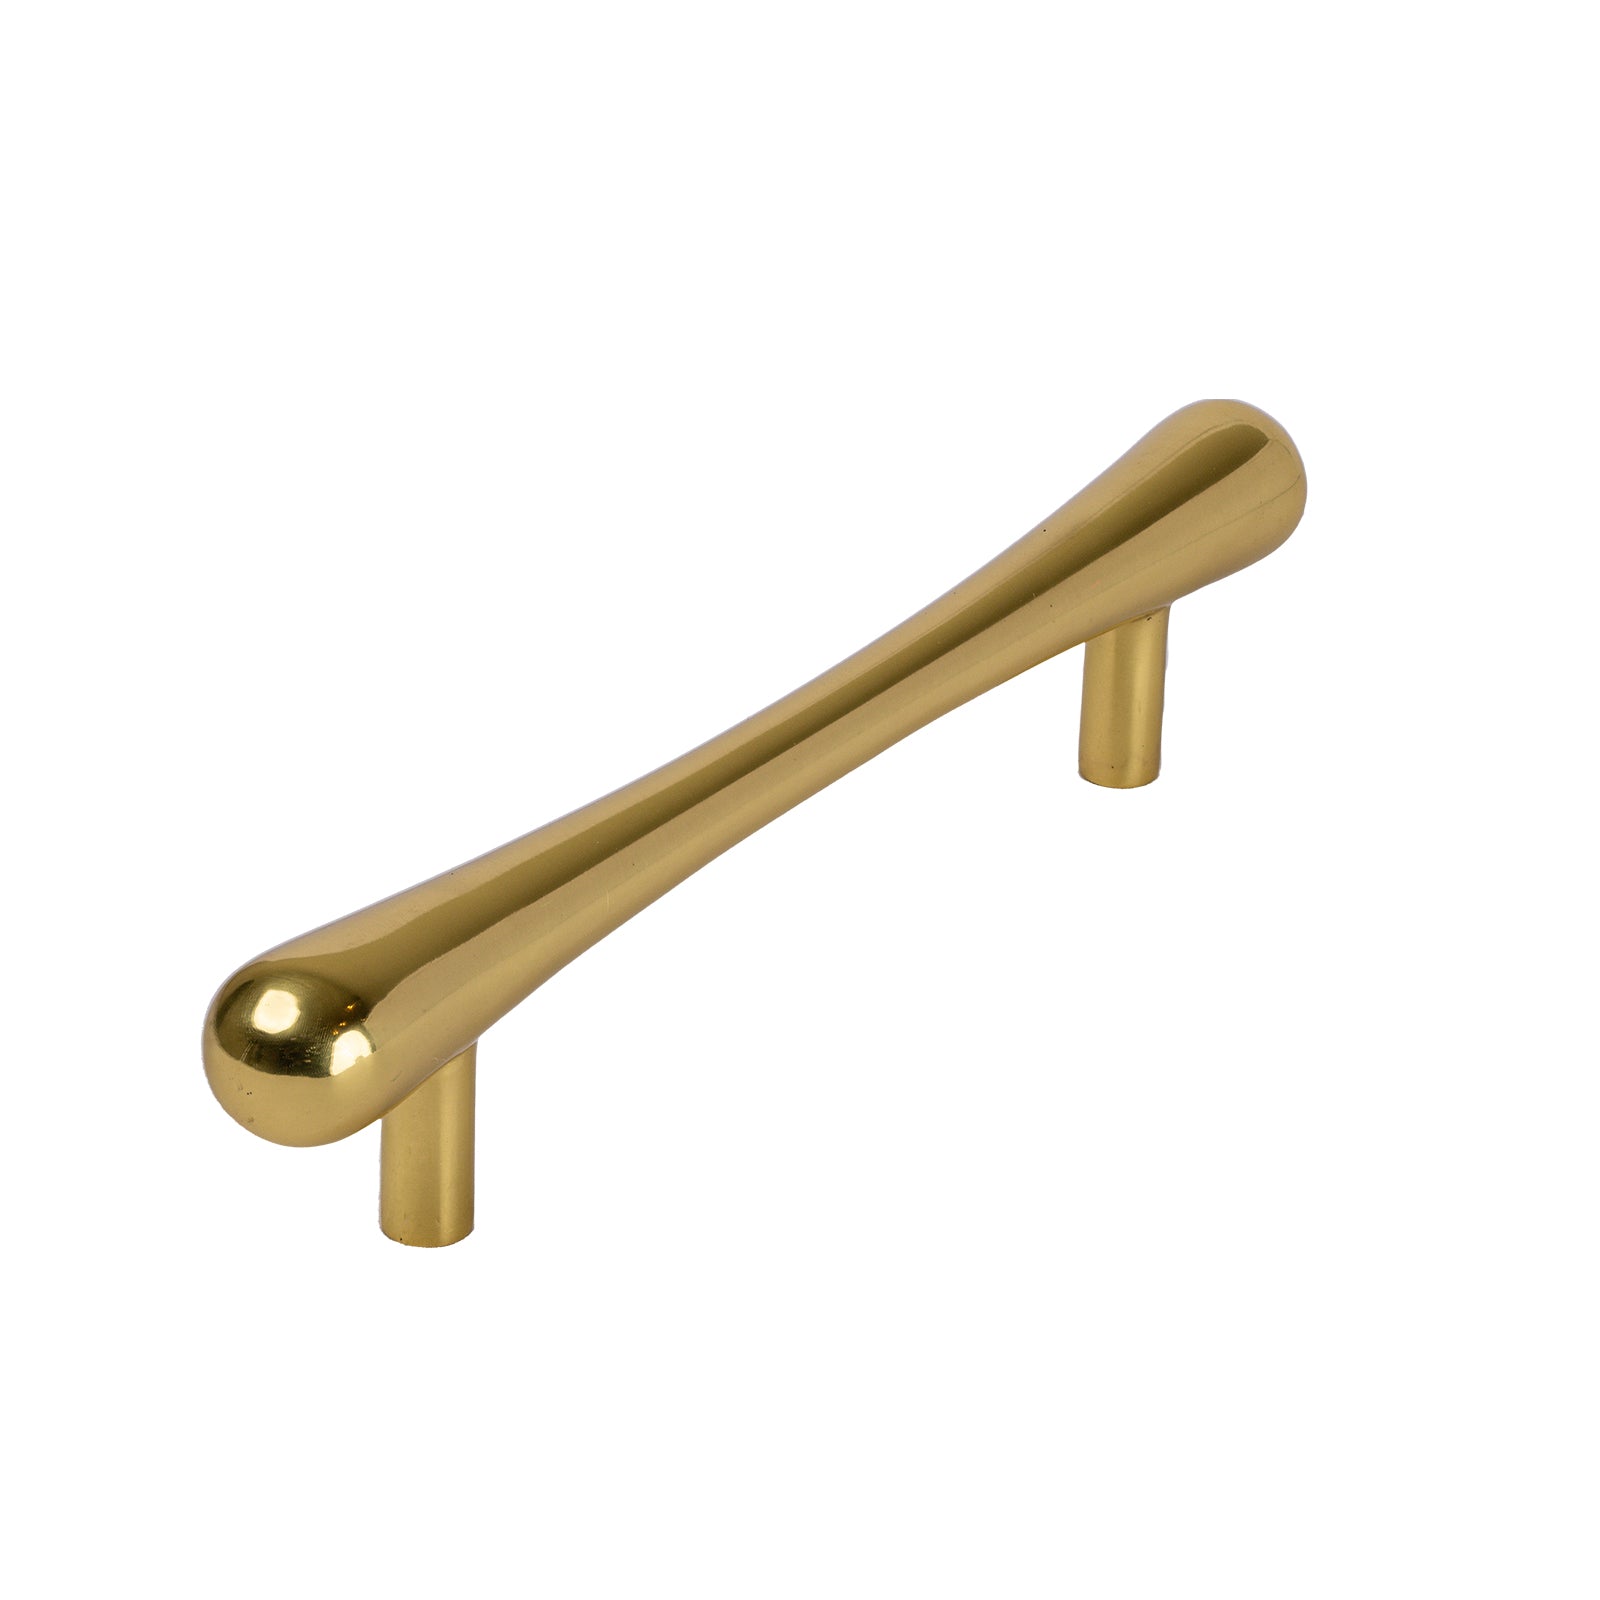 Polished brass Raindrop Pull Handles SHOW